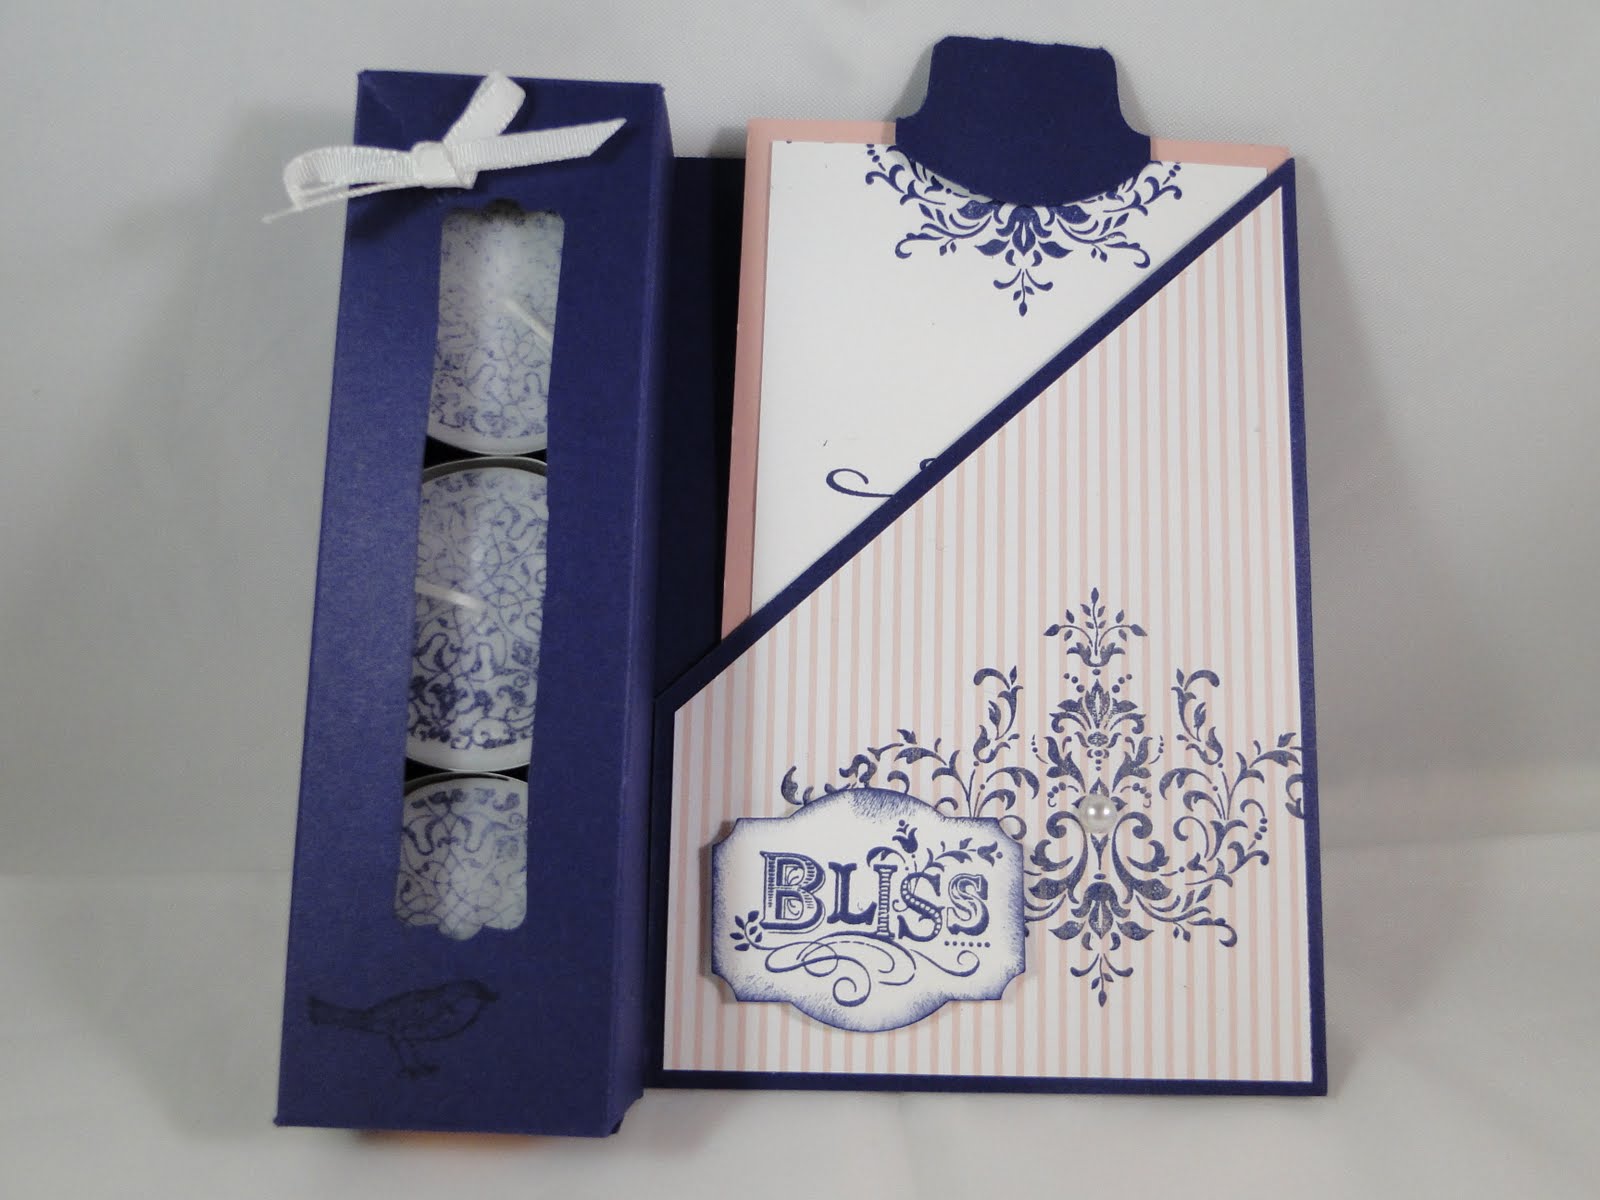 Treat Box & card combo with Bliss